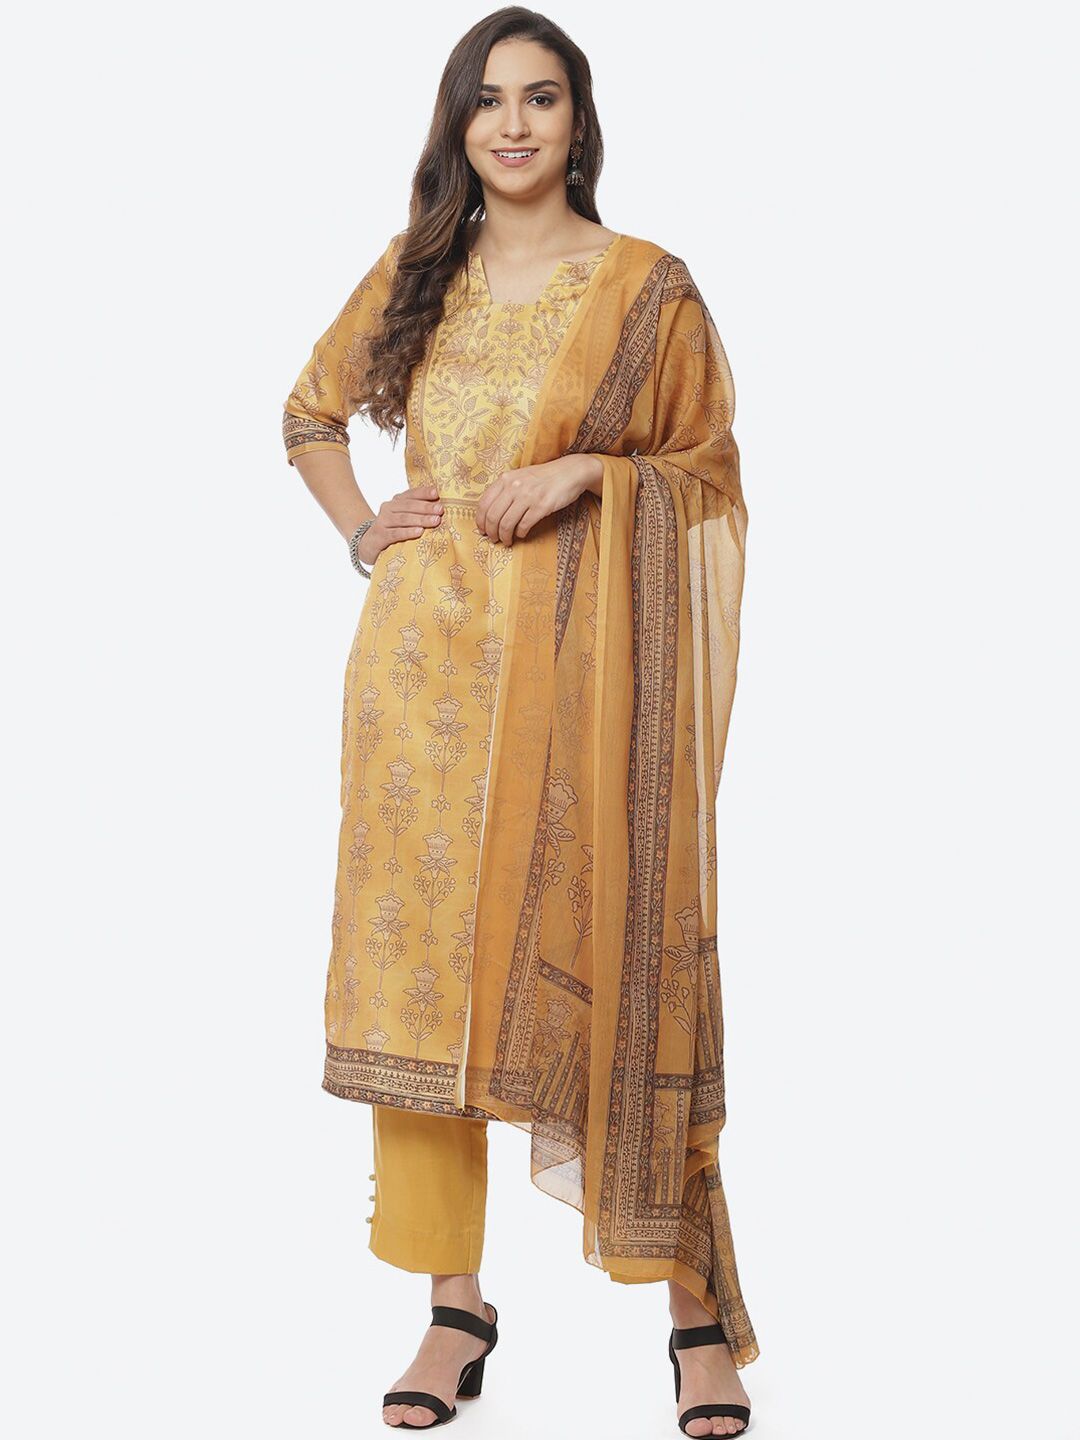 Biba Yellow & Brown Printed Unstitched Dress Material Price in India